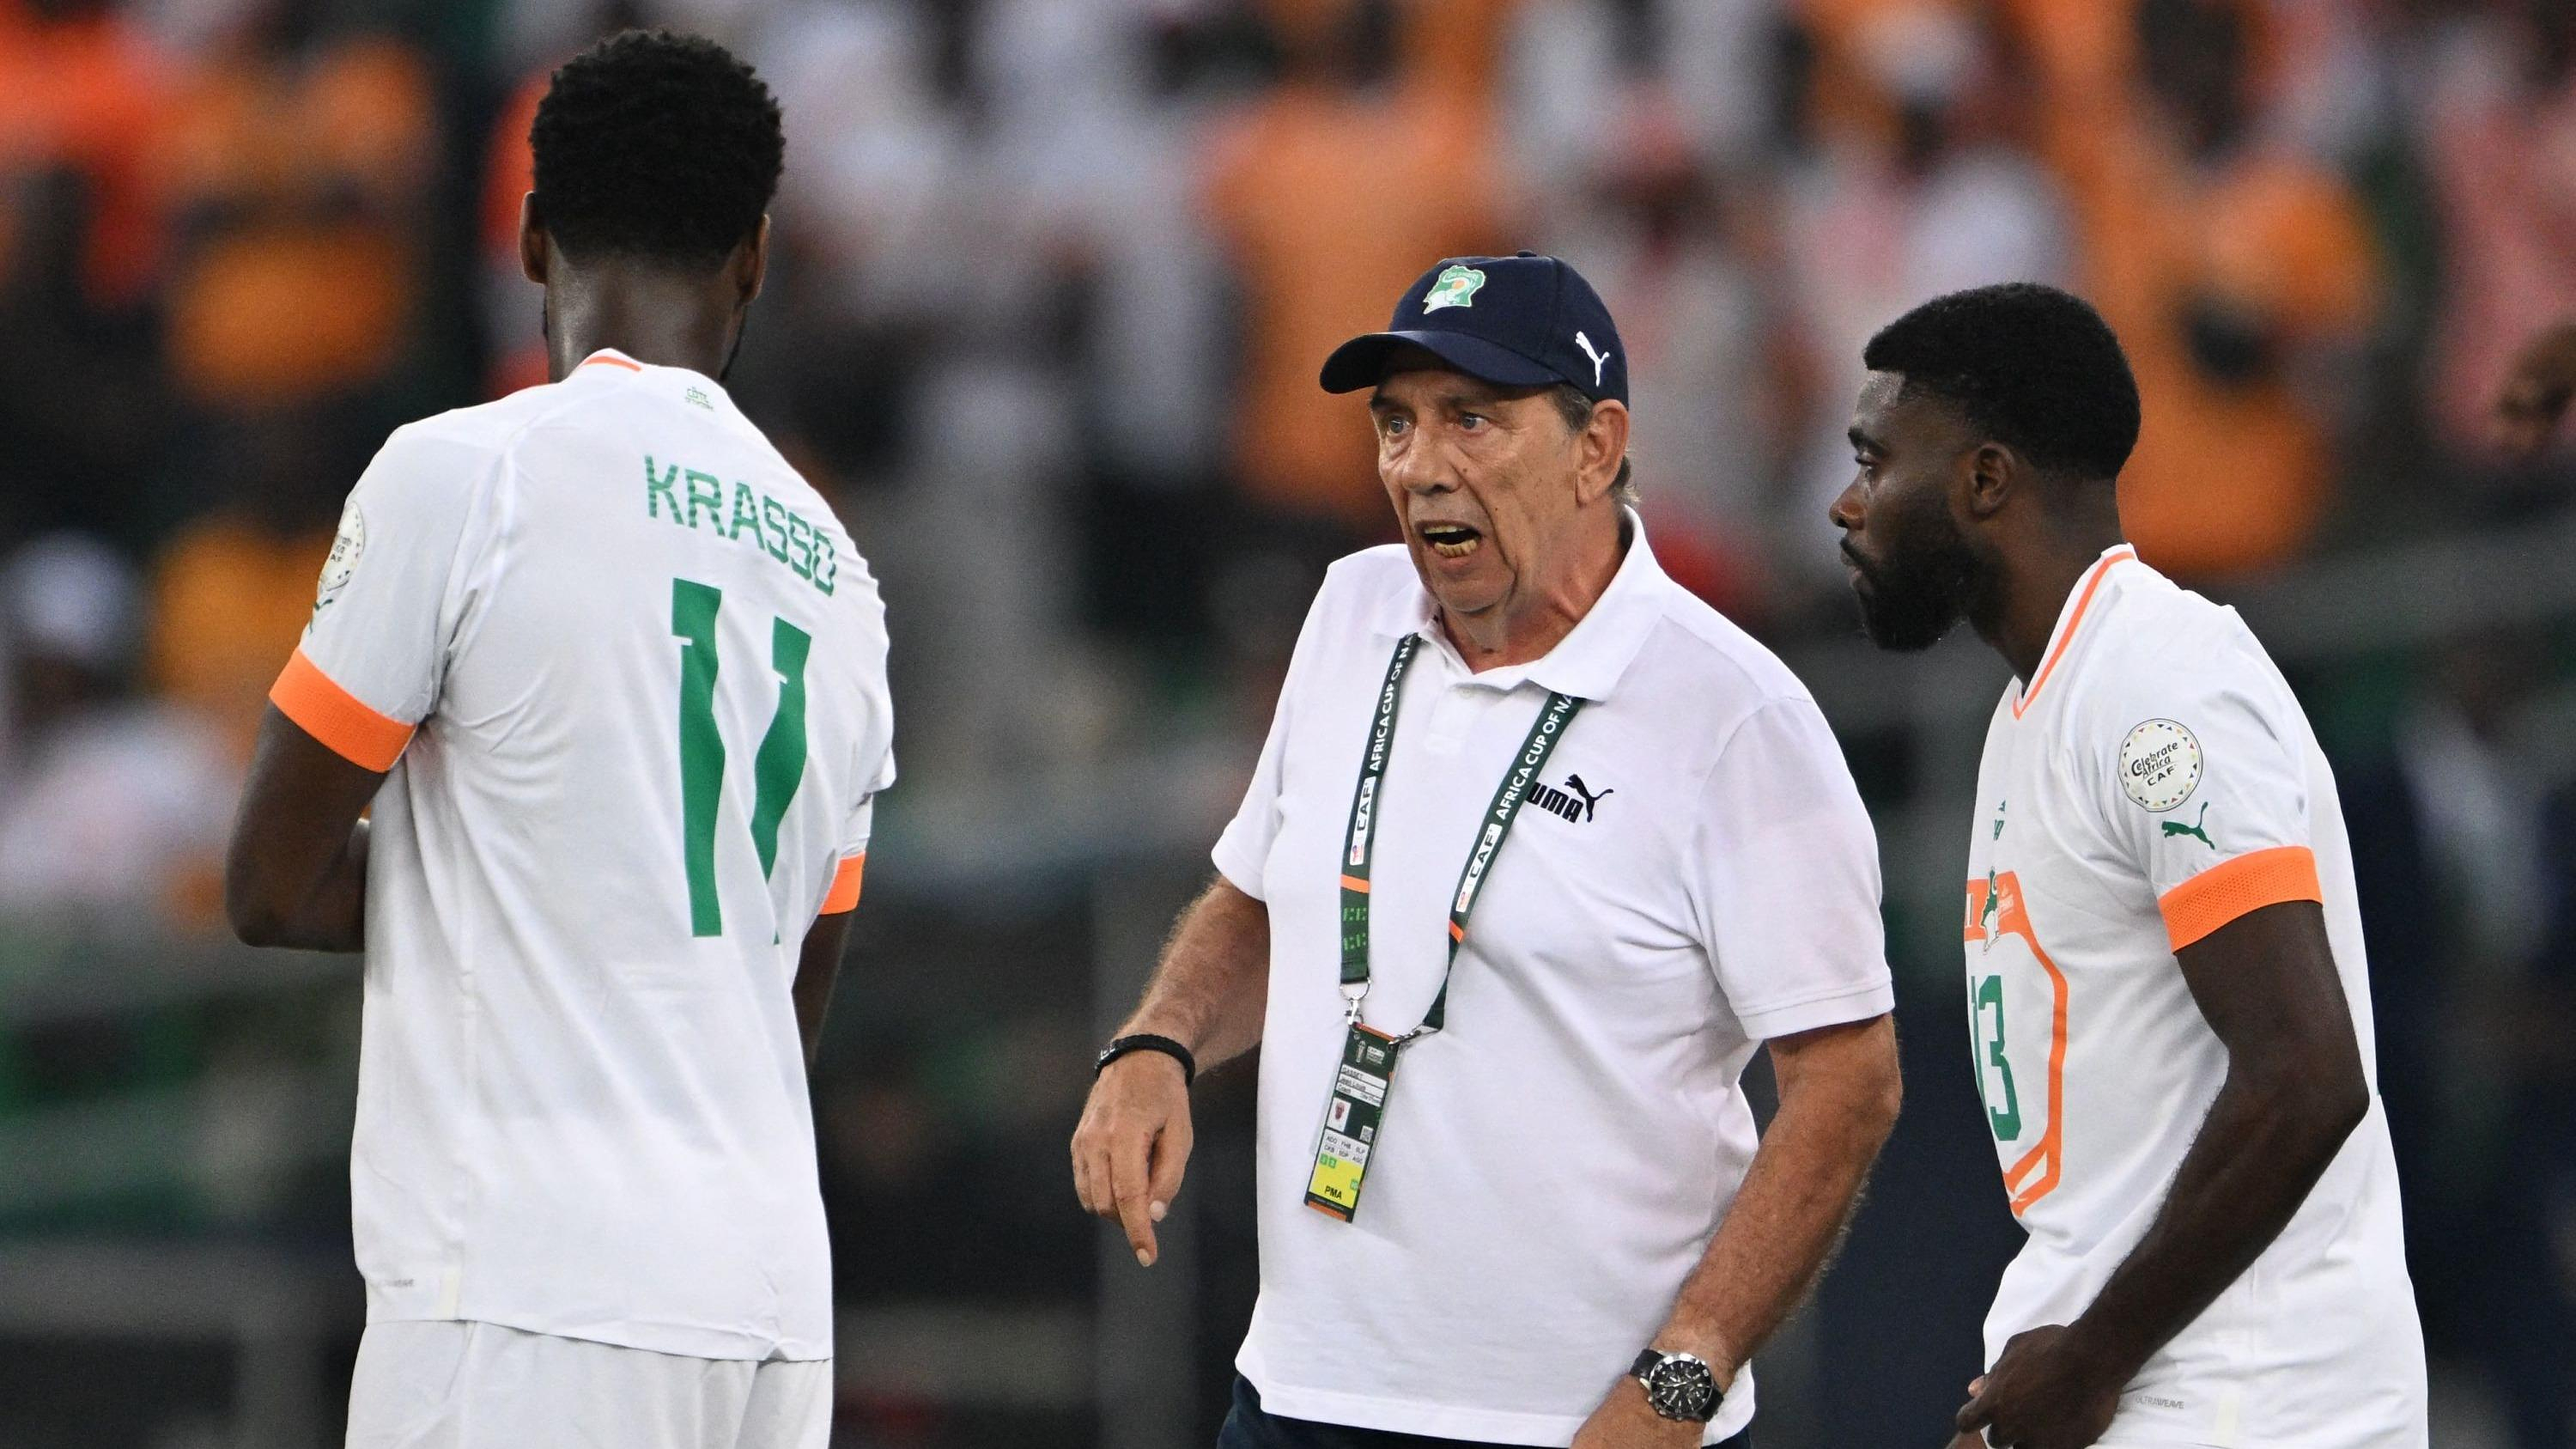 CAN: Jean-Louis Gasset (Ivory Coast) dismissed from his position in full competition